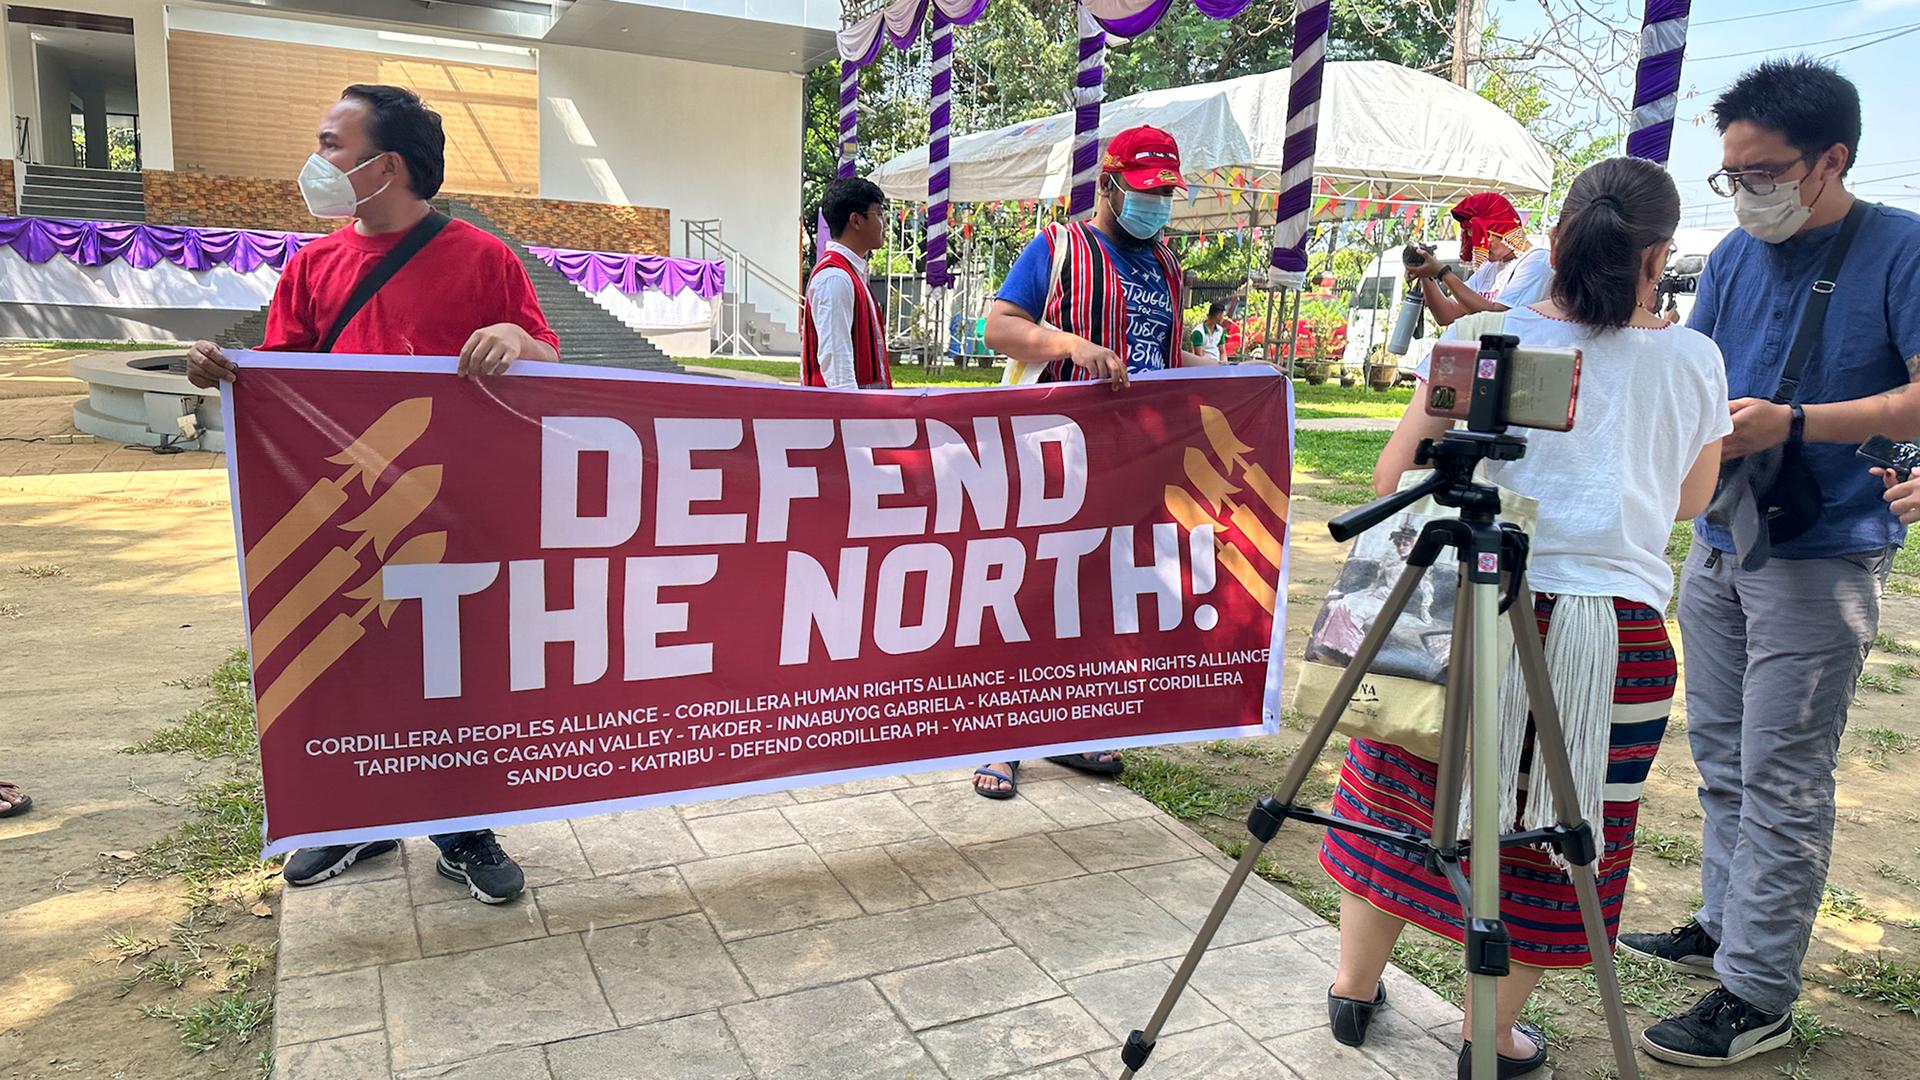 Protesters hold posters calling for protection of Indigenous lands amid growing number of development projects in the Philippines.